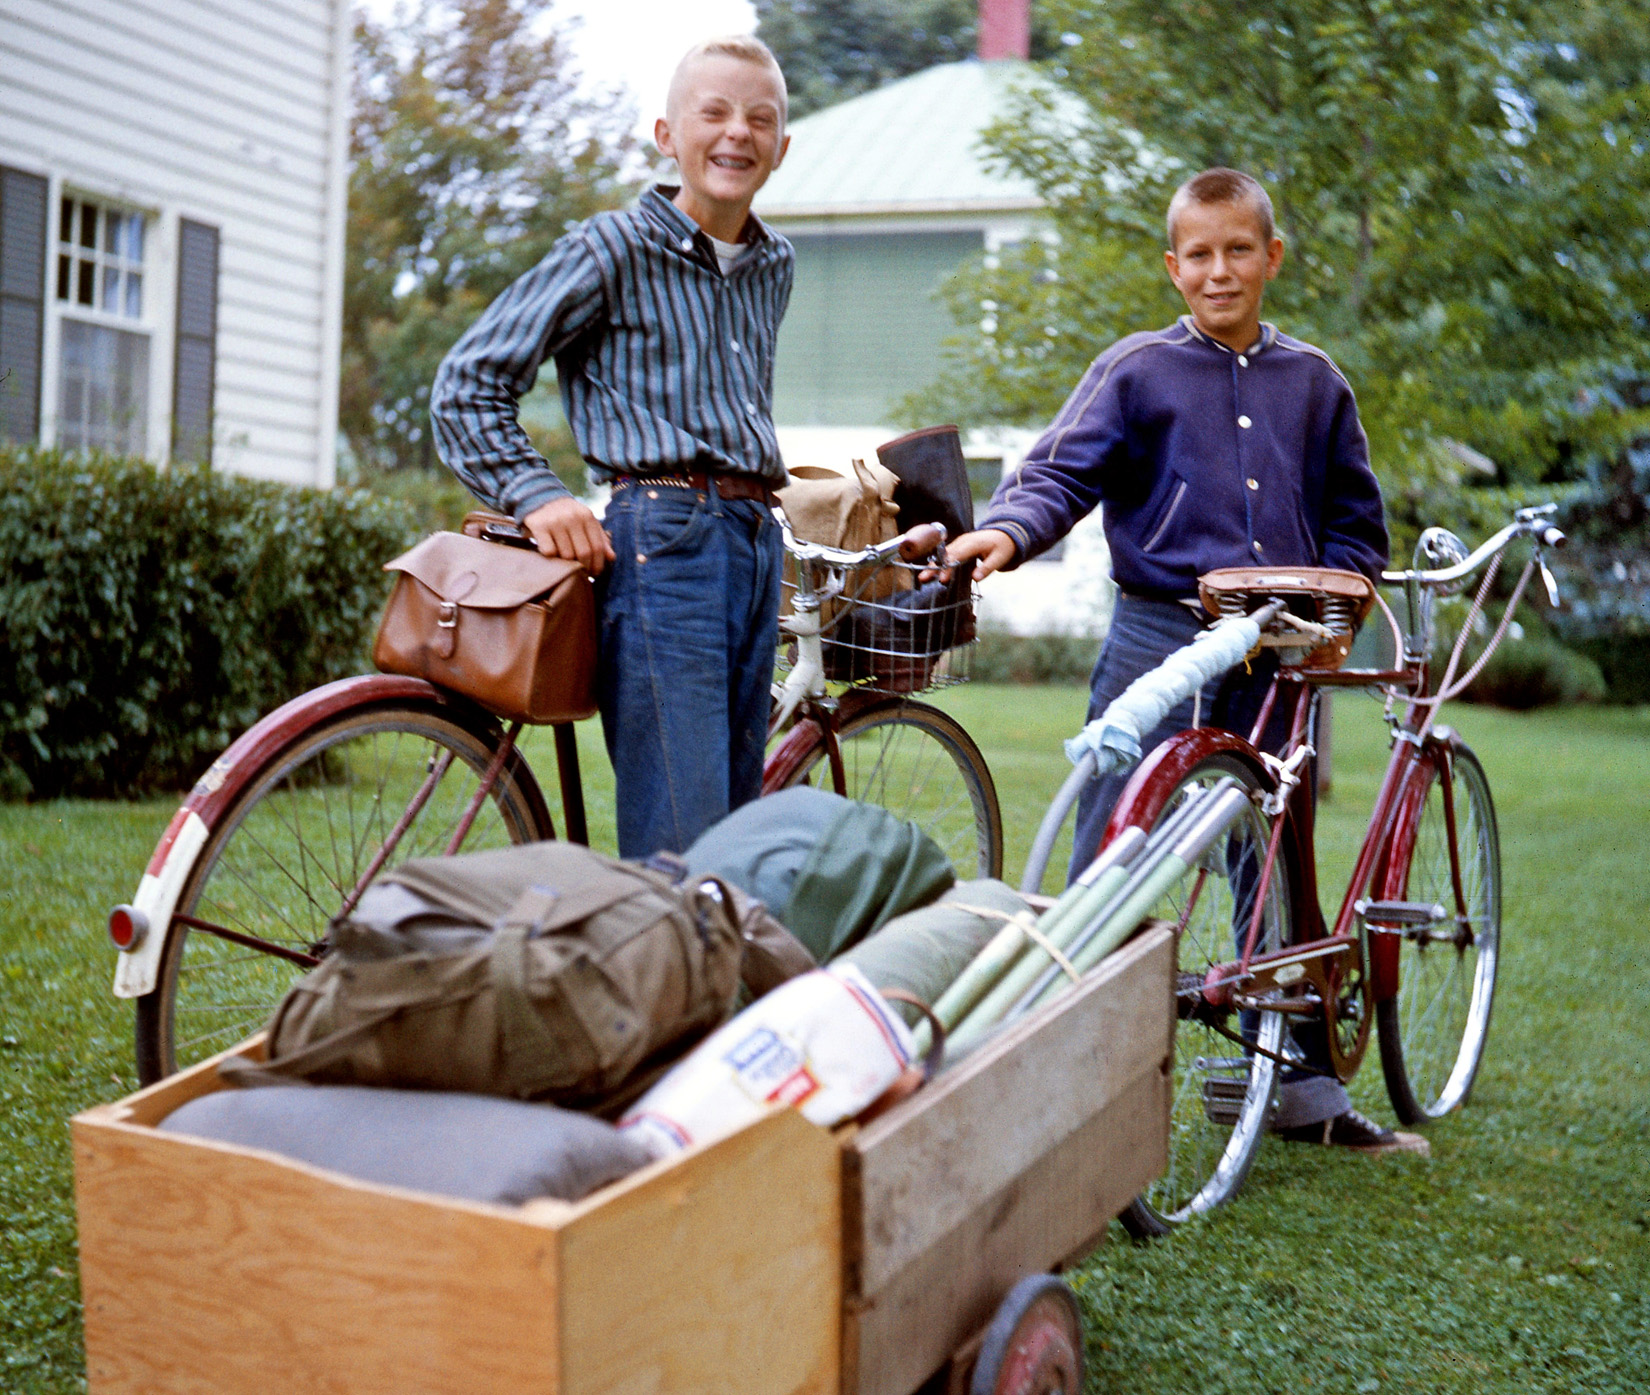 This is my oldest brother and one of his buds, heading off for a weekend of camping, riding their bikes on two-lane blacktop and gravel back roads in the Eastern Townships, Quebec, summer of '59. View full size.



